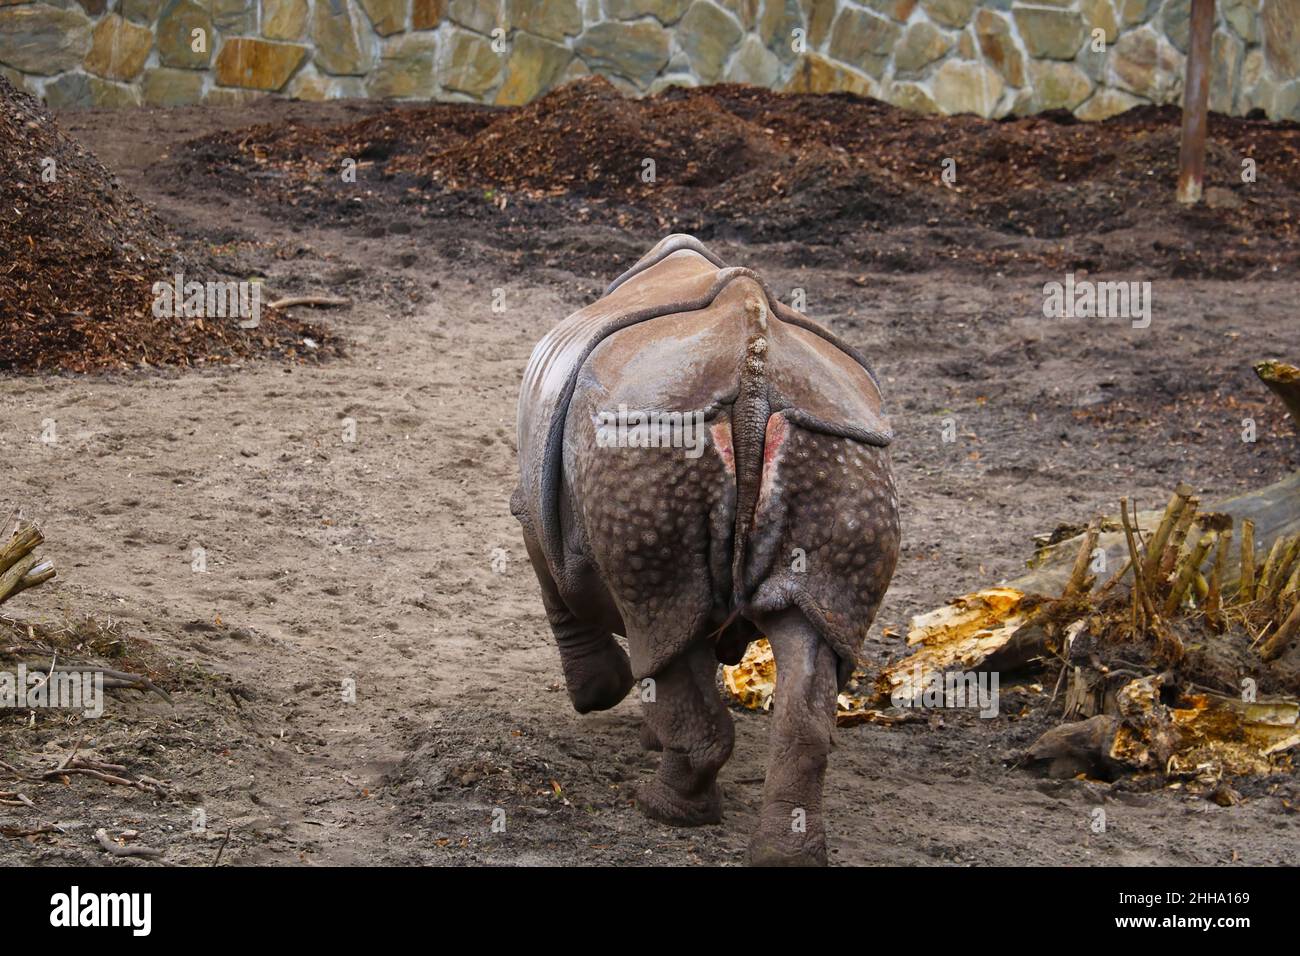 Out of focus. Rear view of a walking rhino in the park Stock Photo